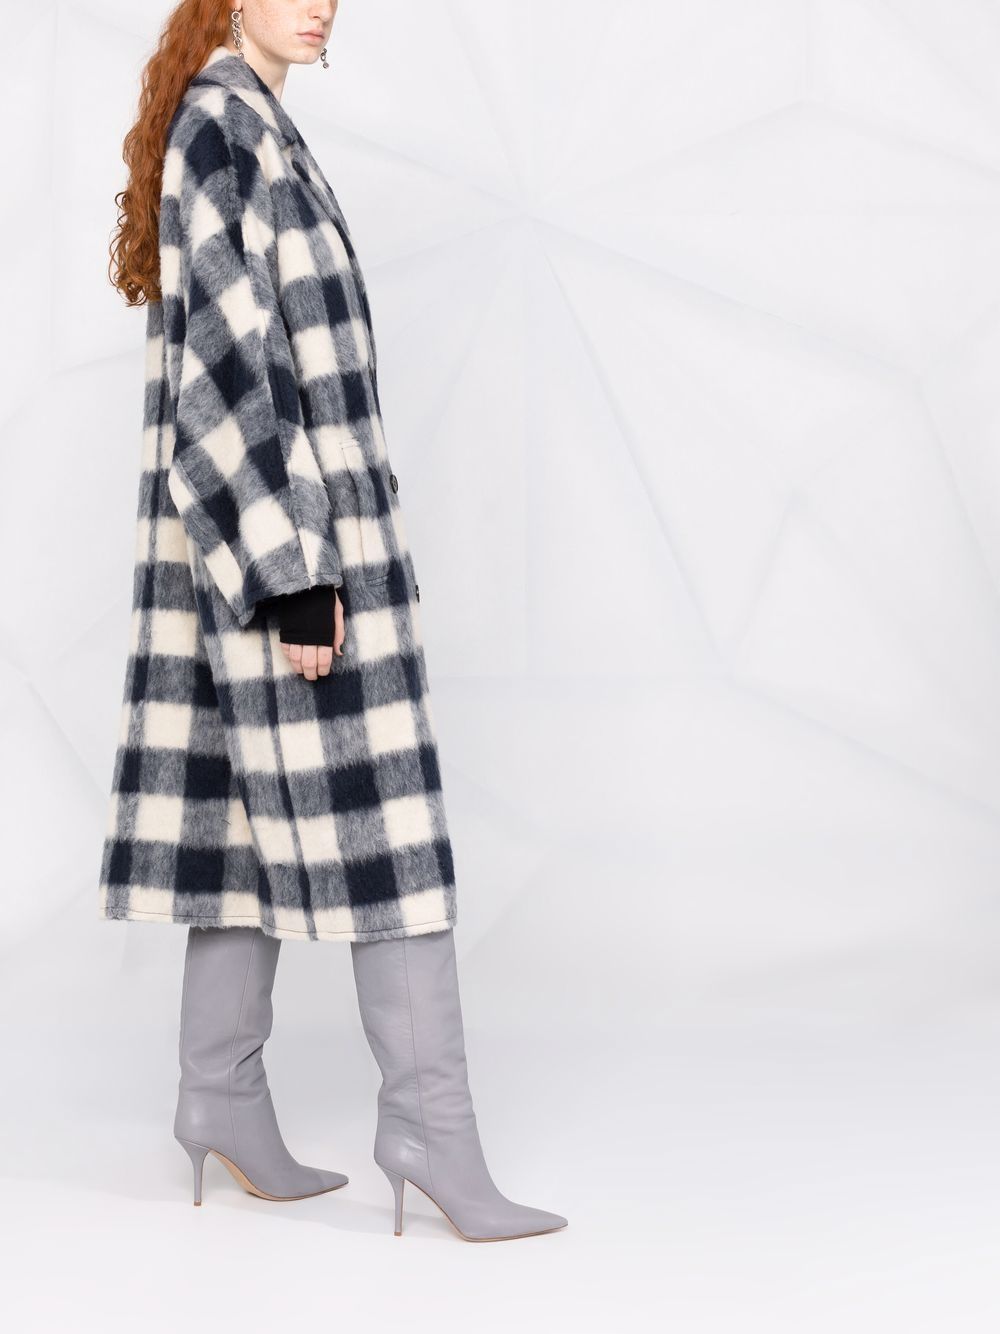 STAND STUDIO check-print double-breasted Wool Coat - Farfetch